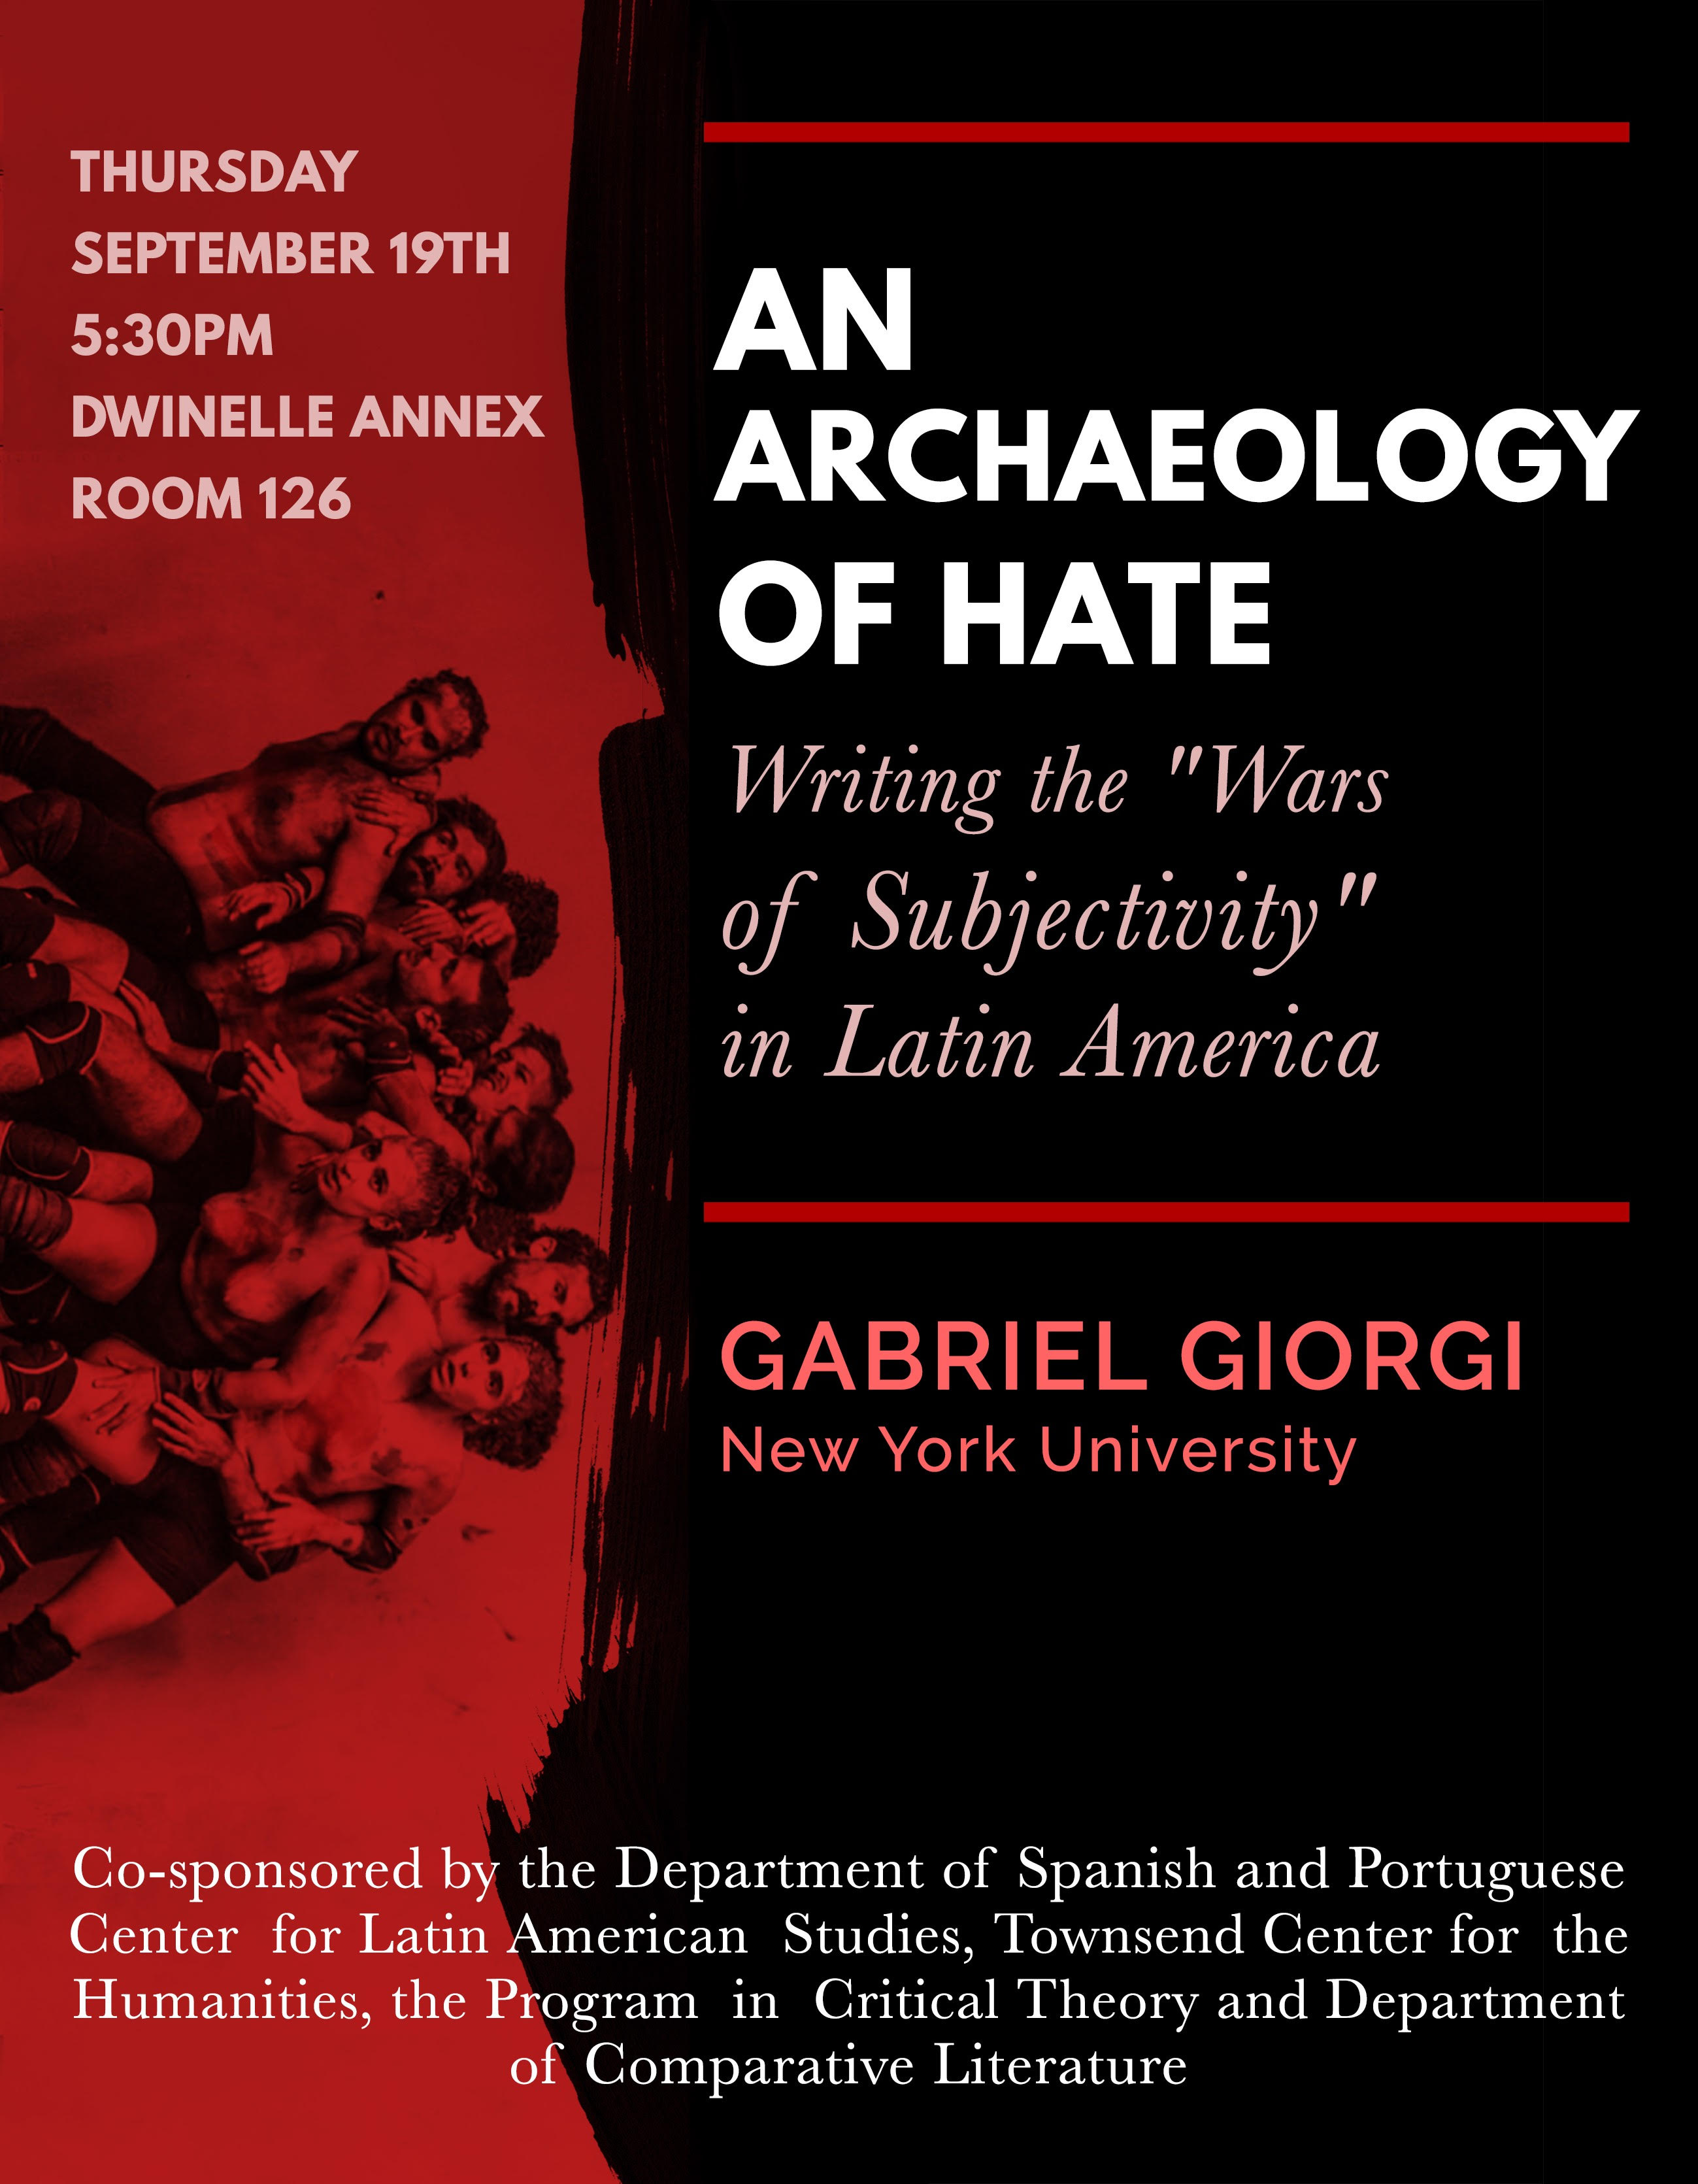 An Archaeology of Hate. Writing the “Wars of Subjectivity” in Latin America – Gabriel Giorgi, New York University